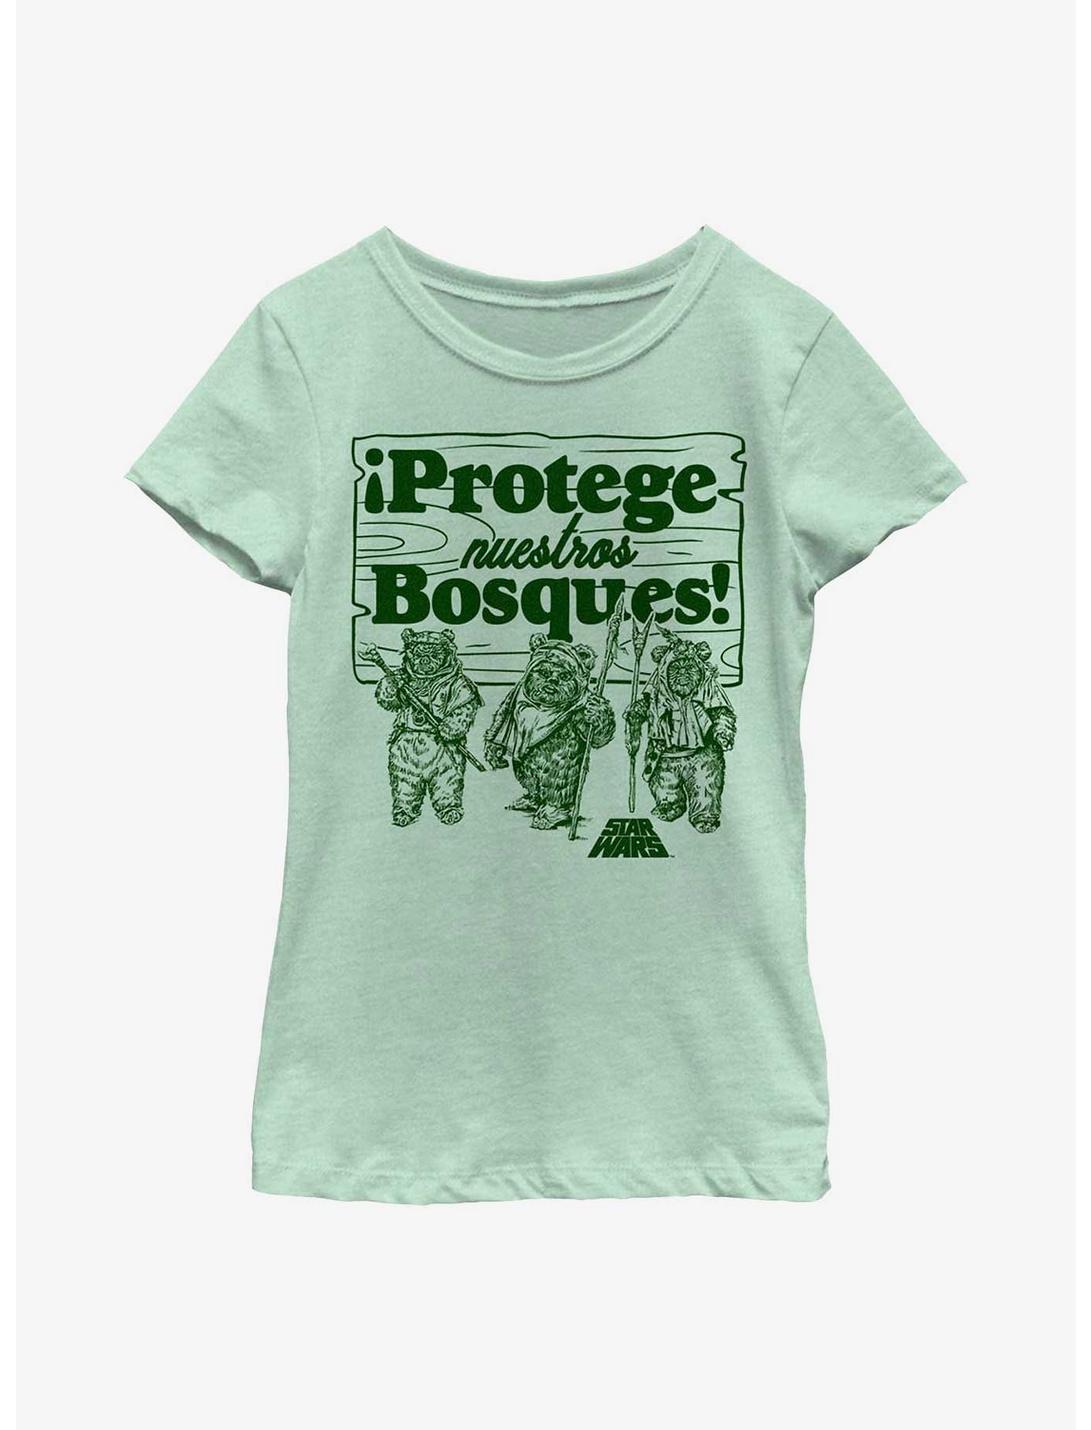 Star Wars Protege Nuestros Bosques Protect Our Forests Youth Girls T-Shirt, MINT, hi-res